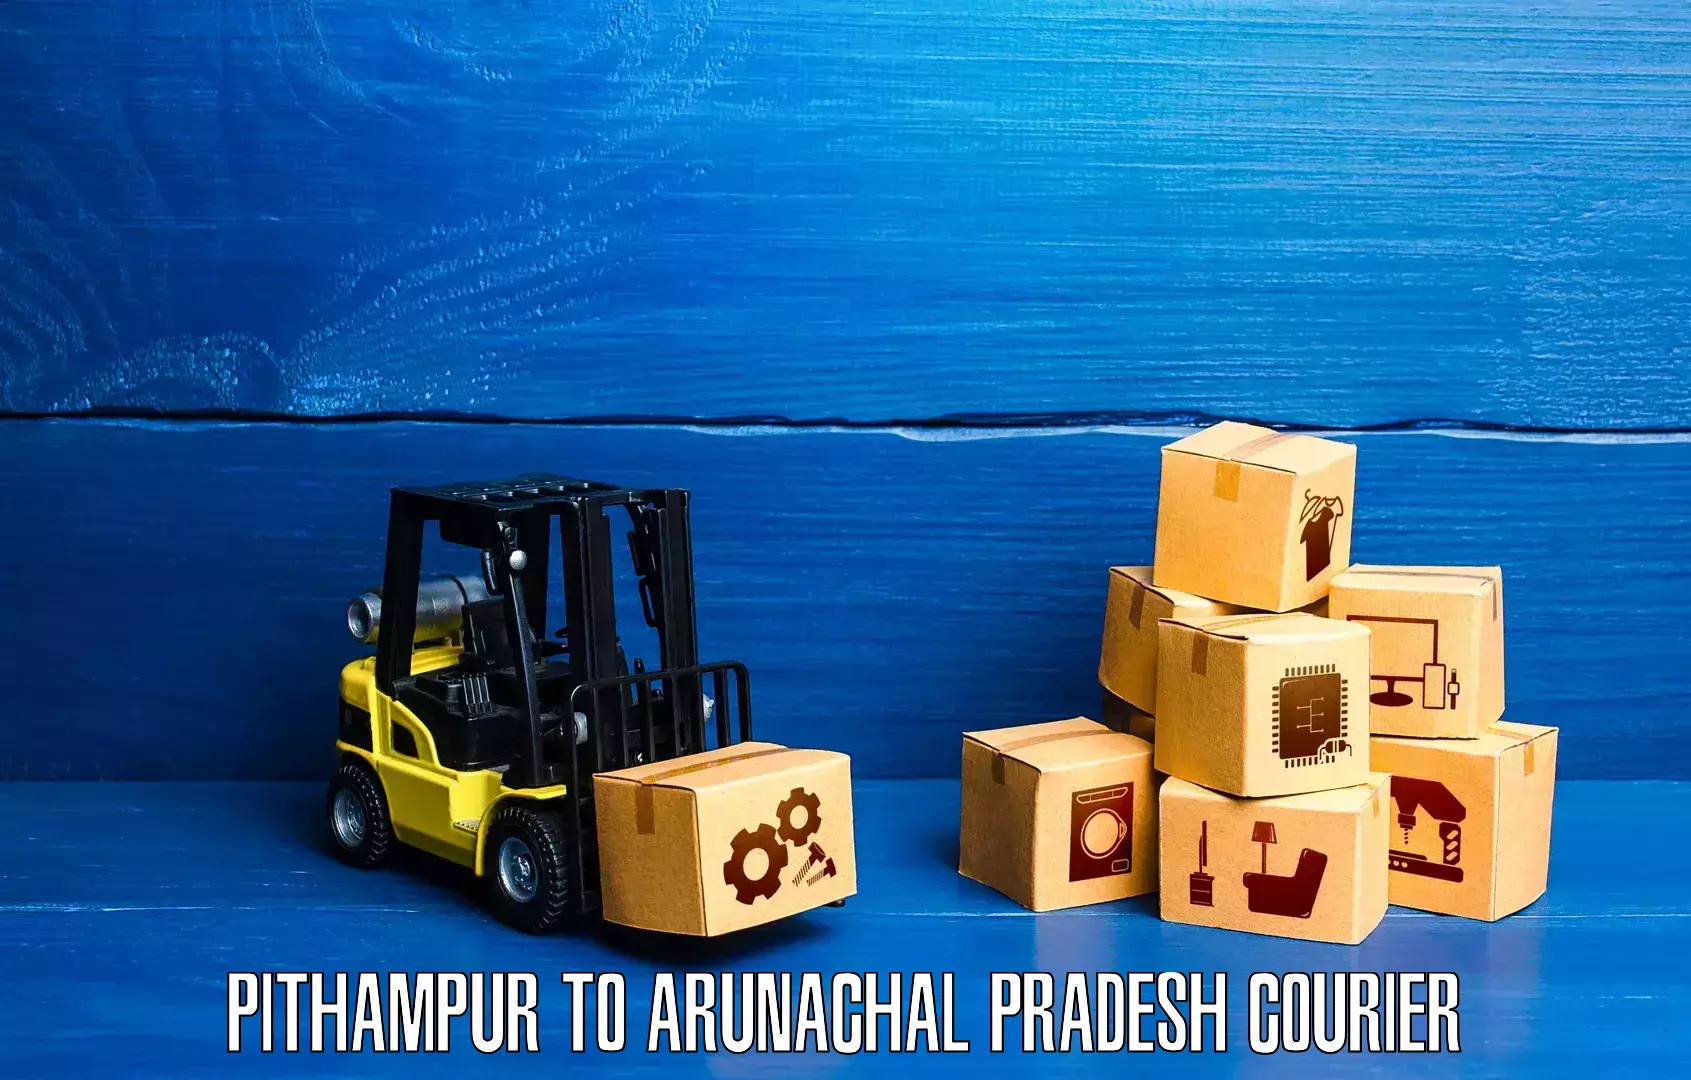 Global freight services Pithampur to Lower Subansiri